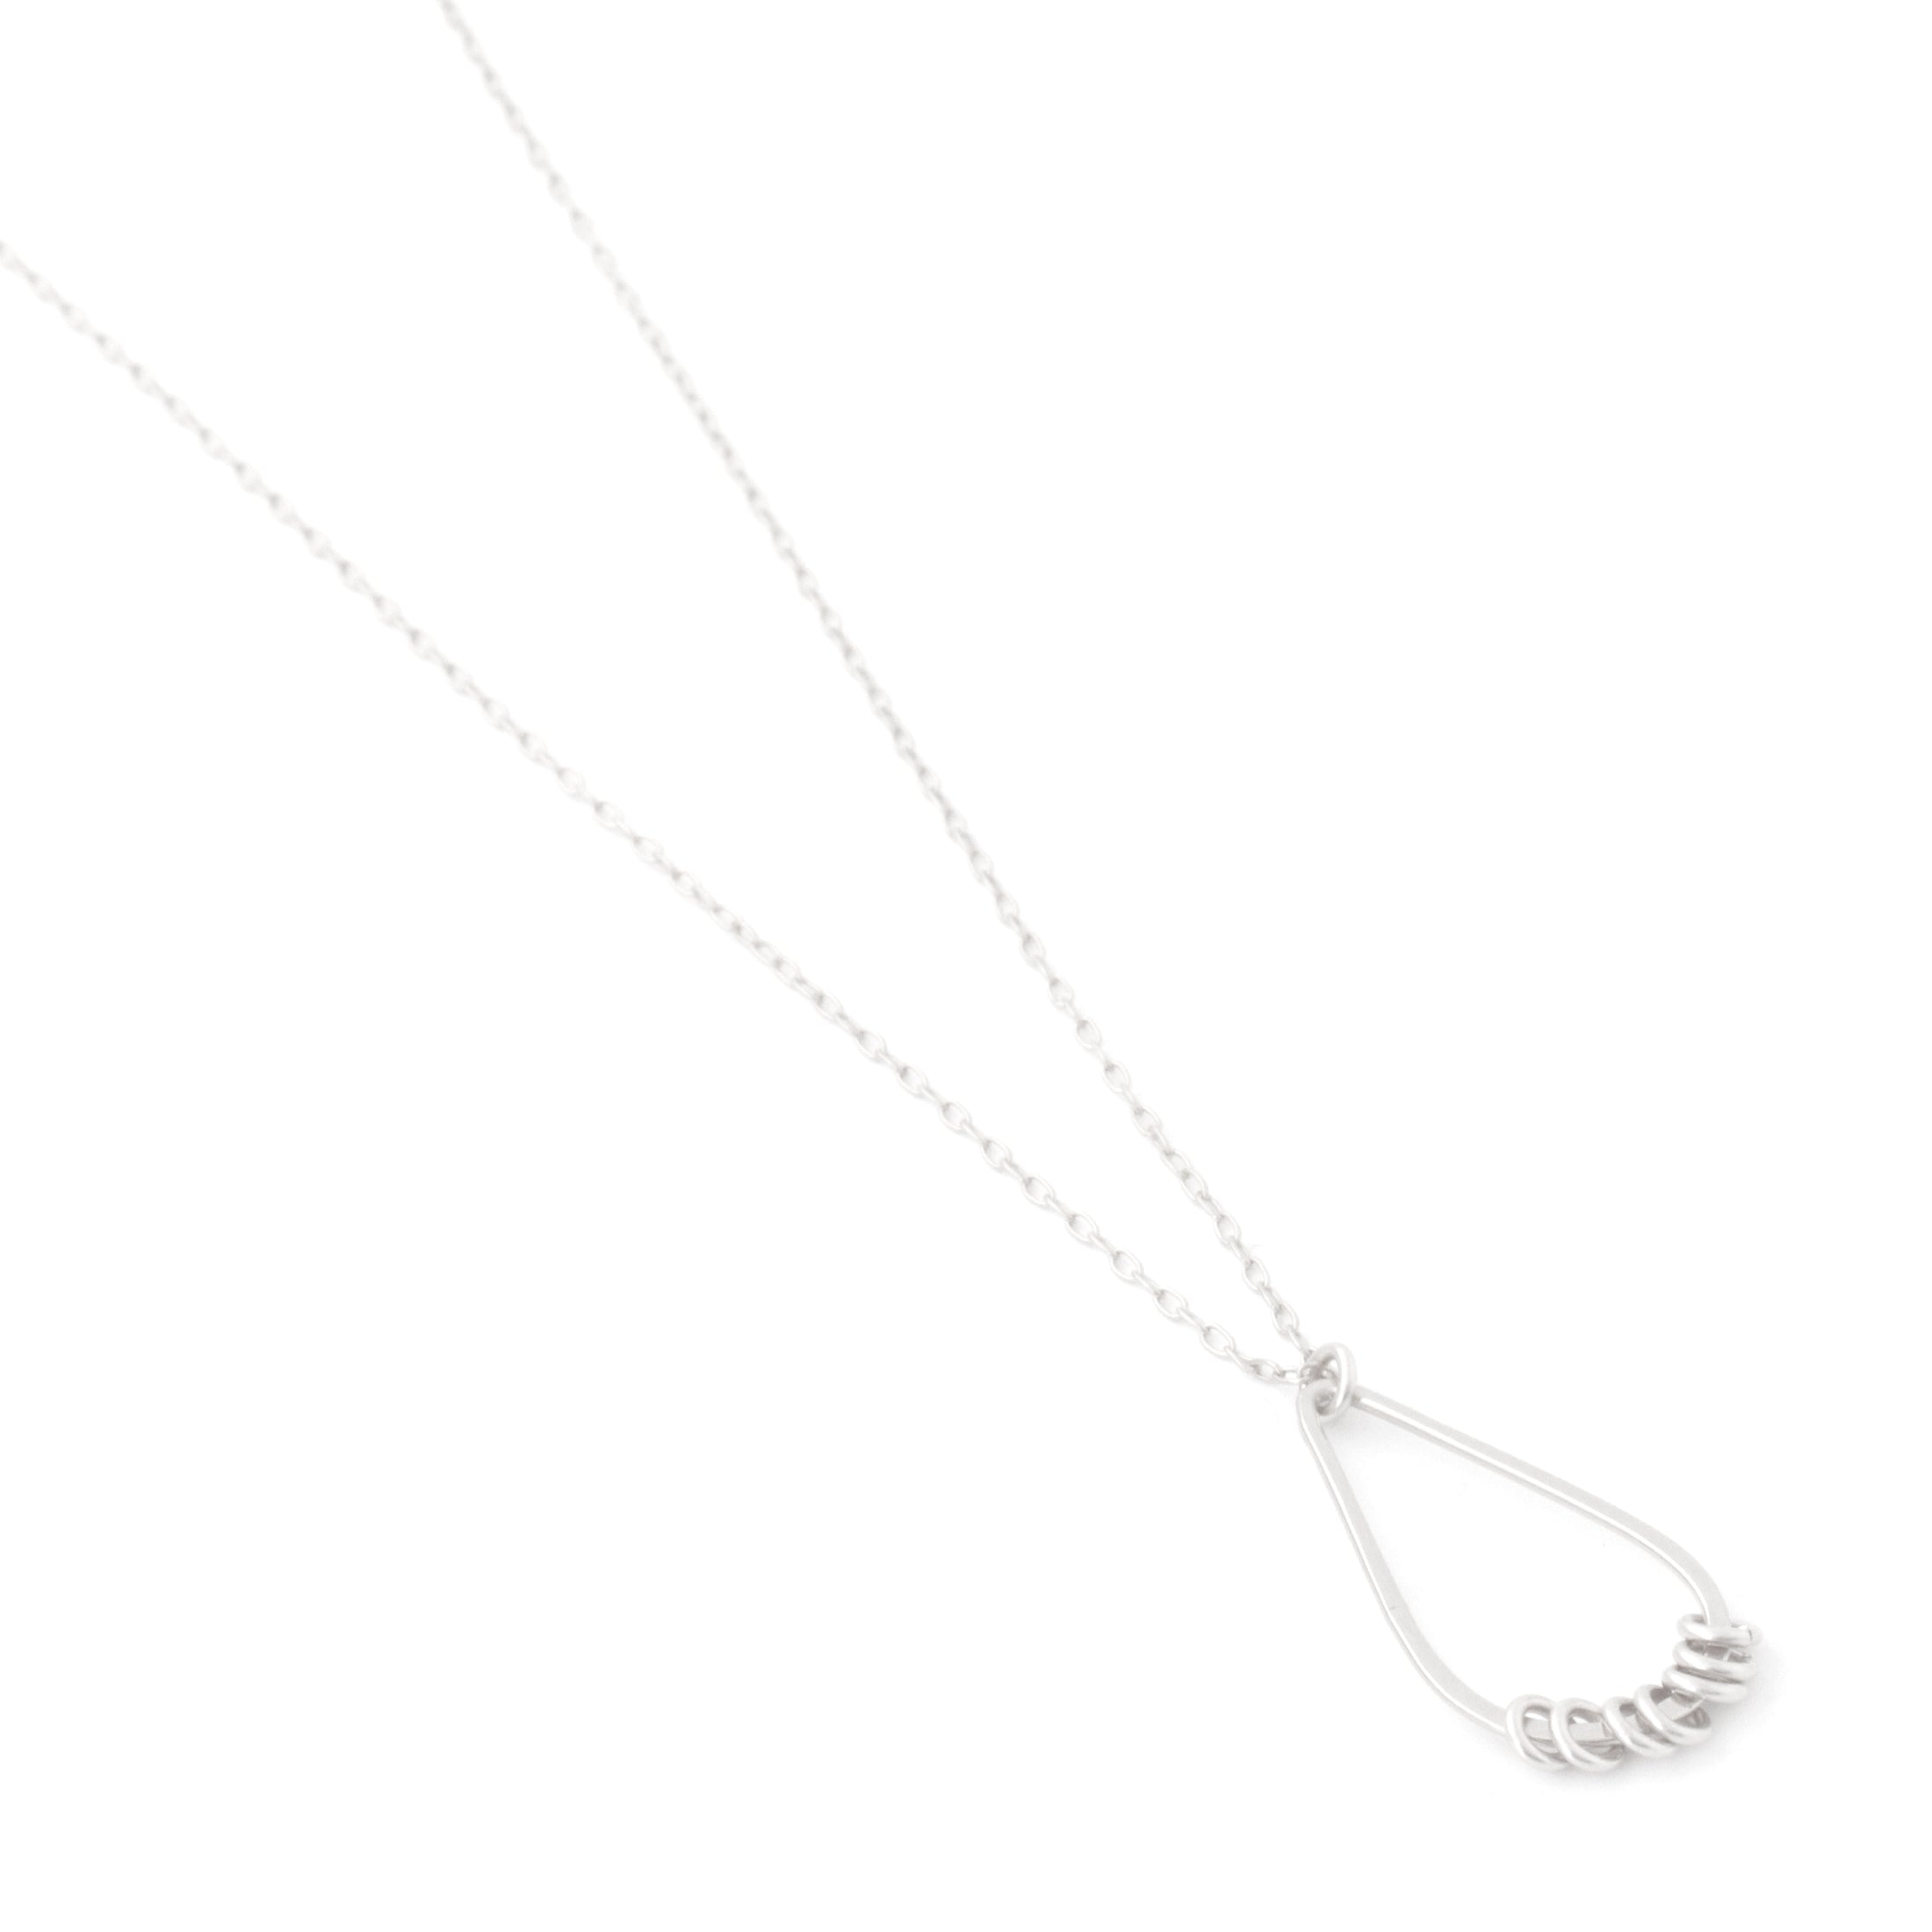 Suspended Necklace (Sterling Silver)